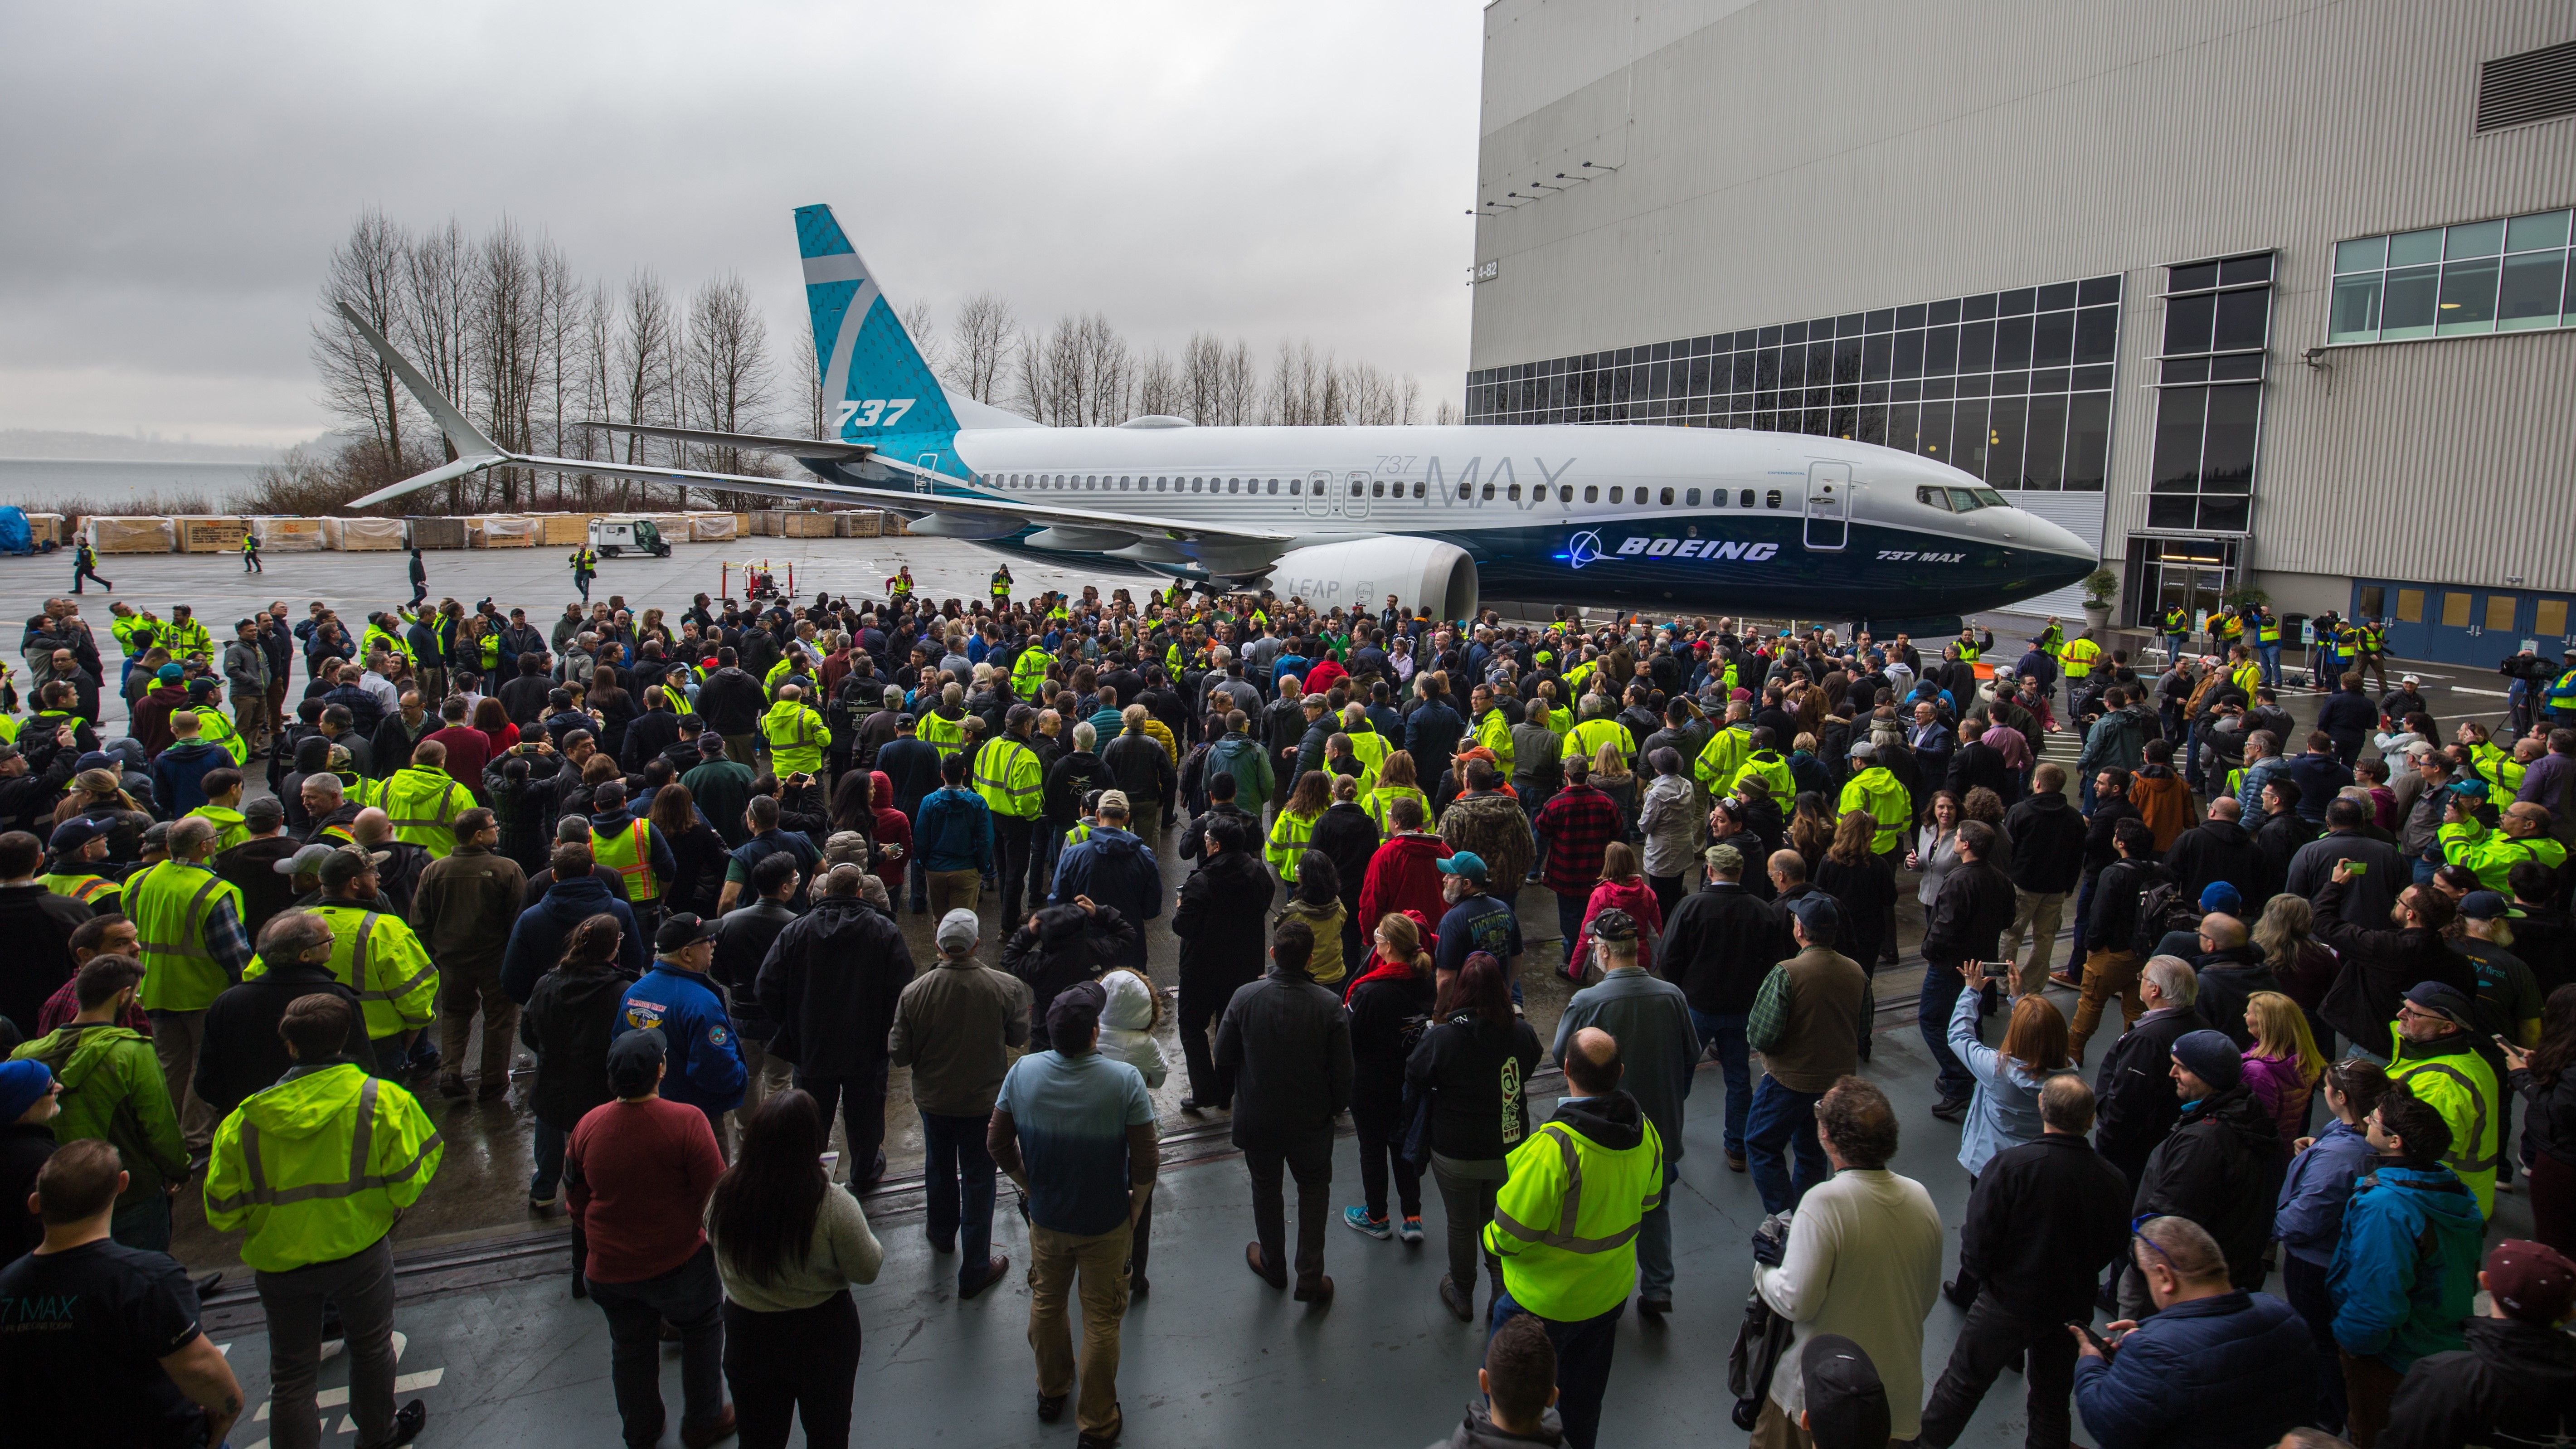 Boeing Debuts First 737 MAX 7 Boeing Debuts First 737 MAX 7 Boeing employees gather around the first 737 MAX 7 to come off the Renton, Wash. assembly line